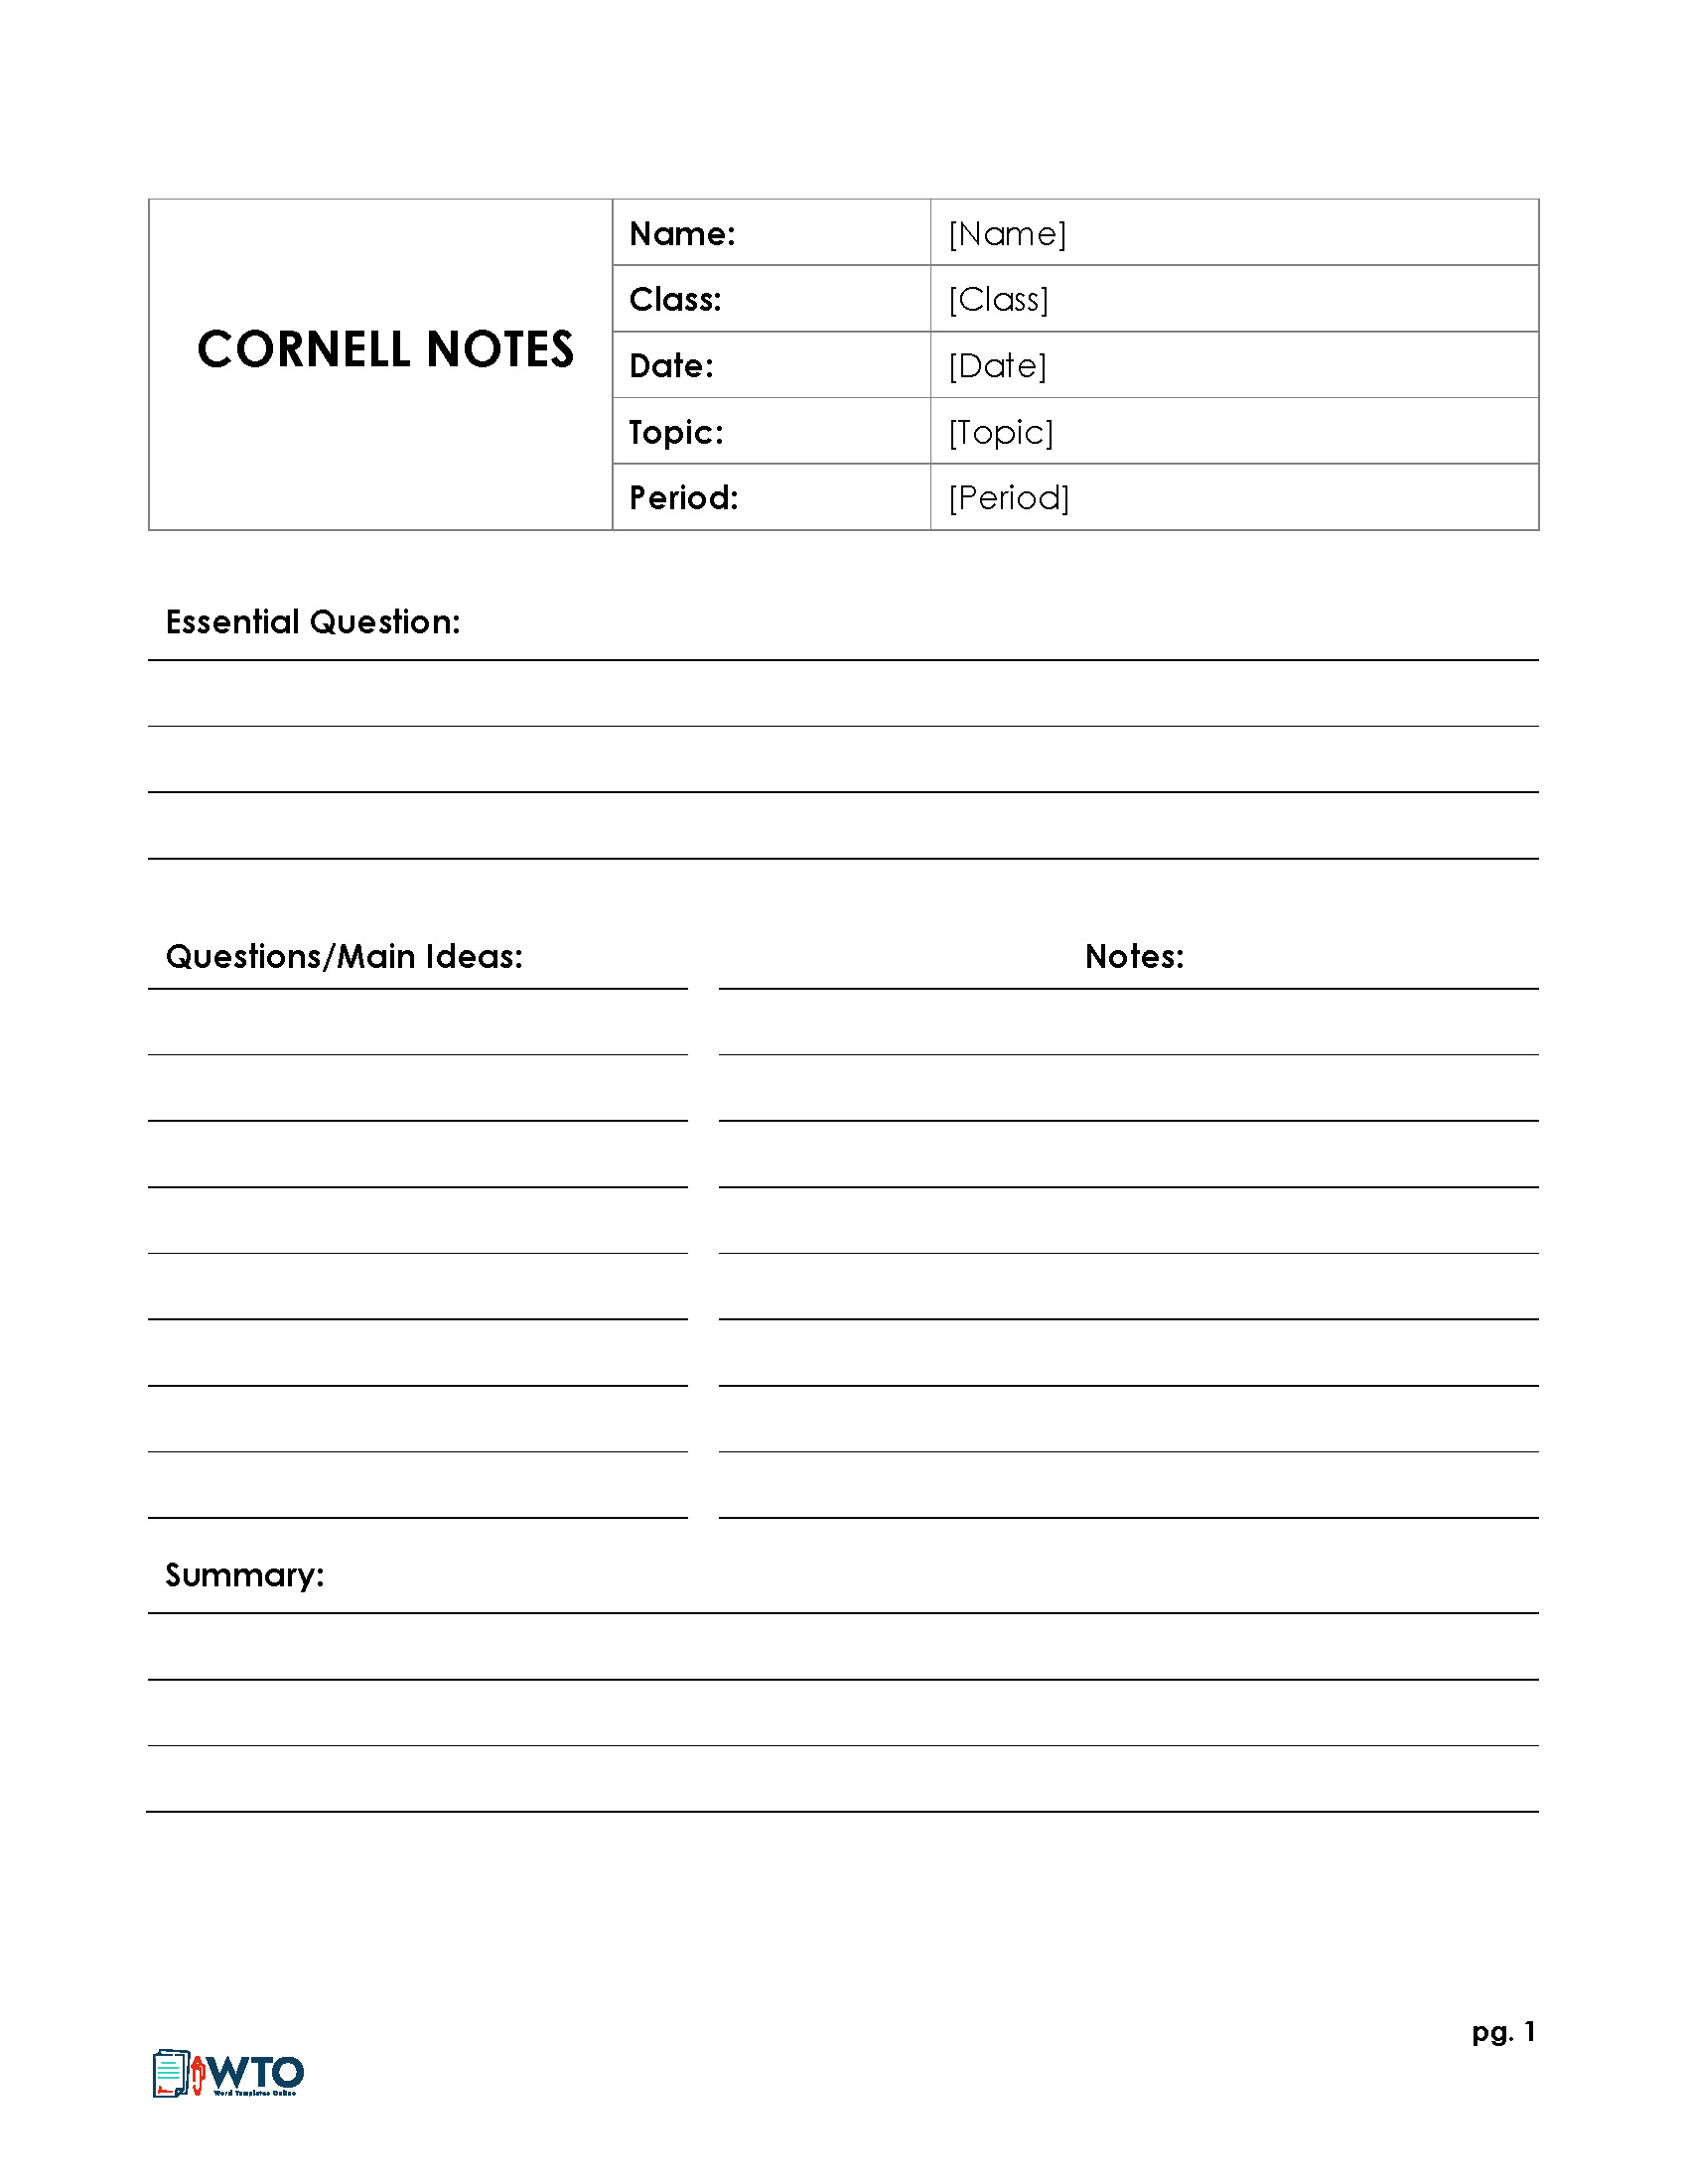 22 Free Cornell Note Templates (Cornell Note Taking Explained) Regarding Word Note Taking Template